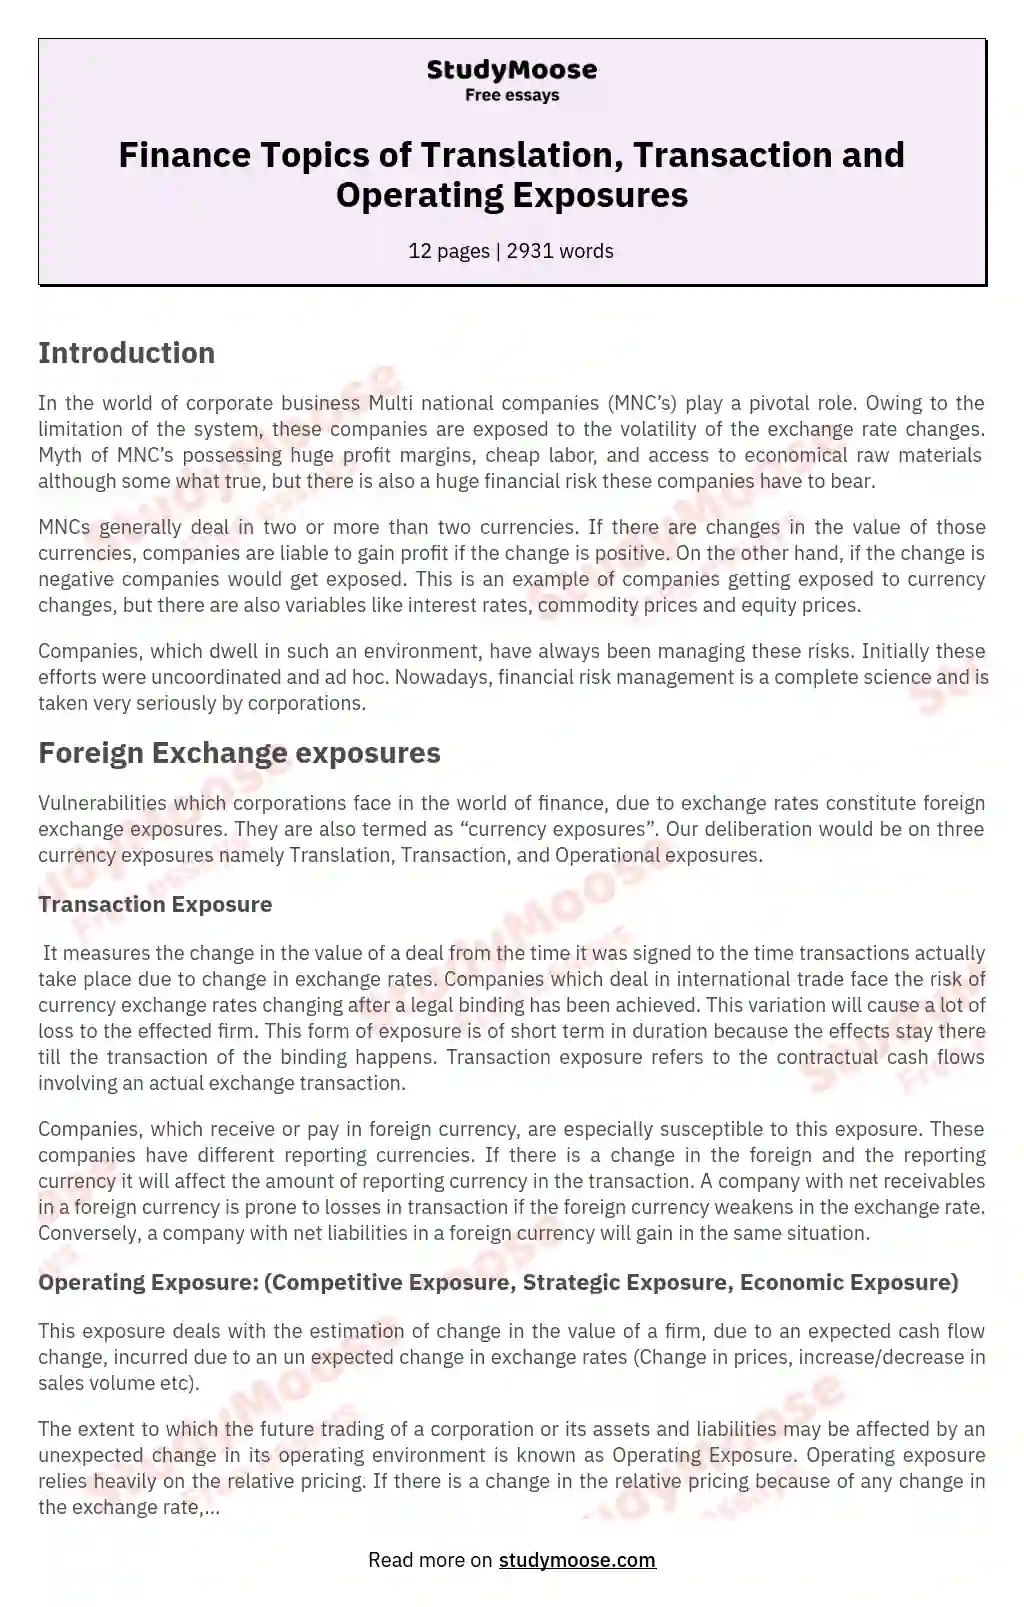 Finance Topics of Translation, Transaction and Operating Exposures essay